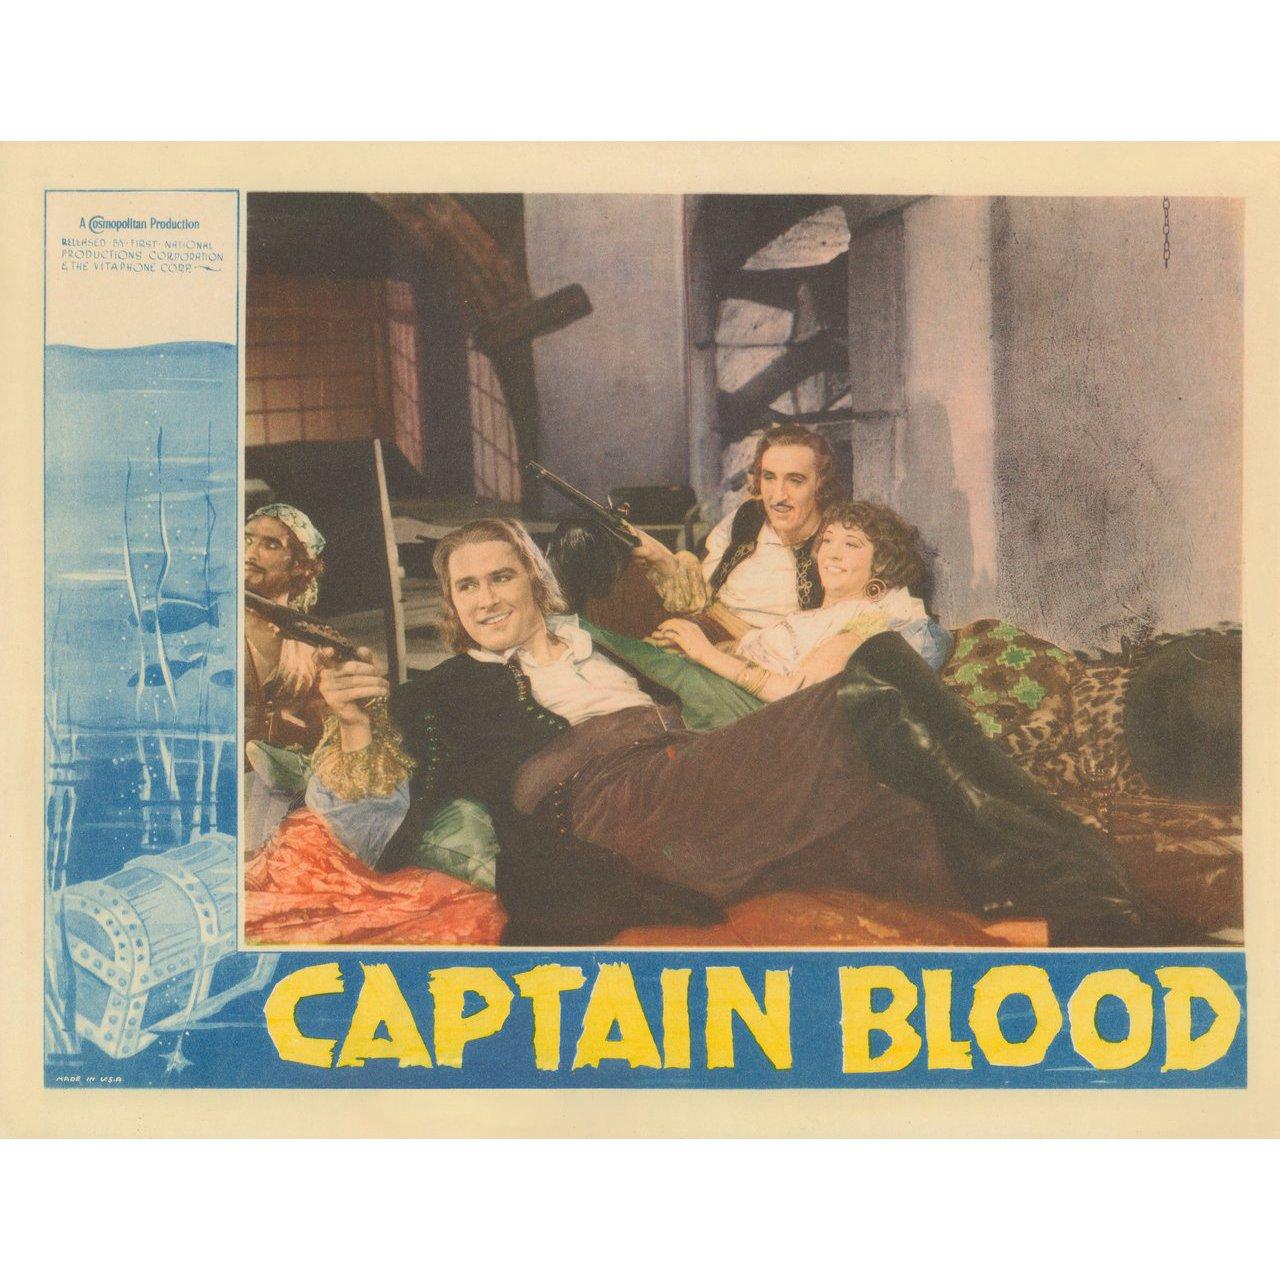 Original 1935 U.S. scene card for the film Captain Blood directed by Michael Curtiz with Errol Flynn / Olivia de Havilland / Lionel Atwill / Basil Rathbone. Very Good-Fine condition, paper-backed. Please note: the size is stated in inches and the